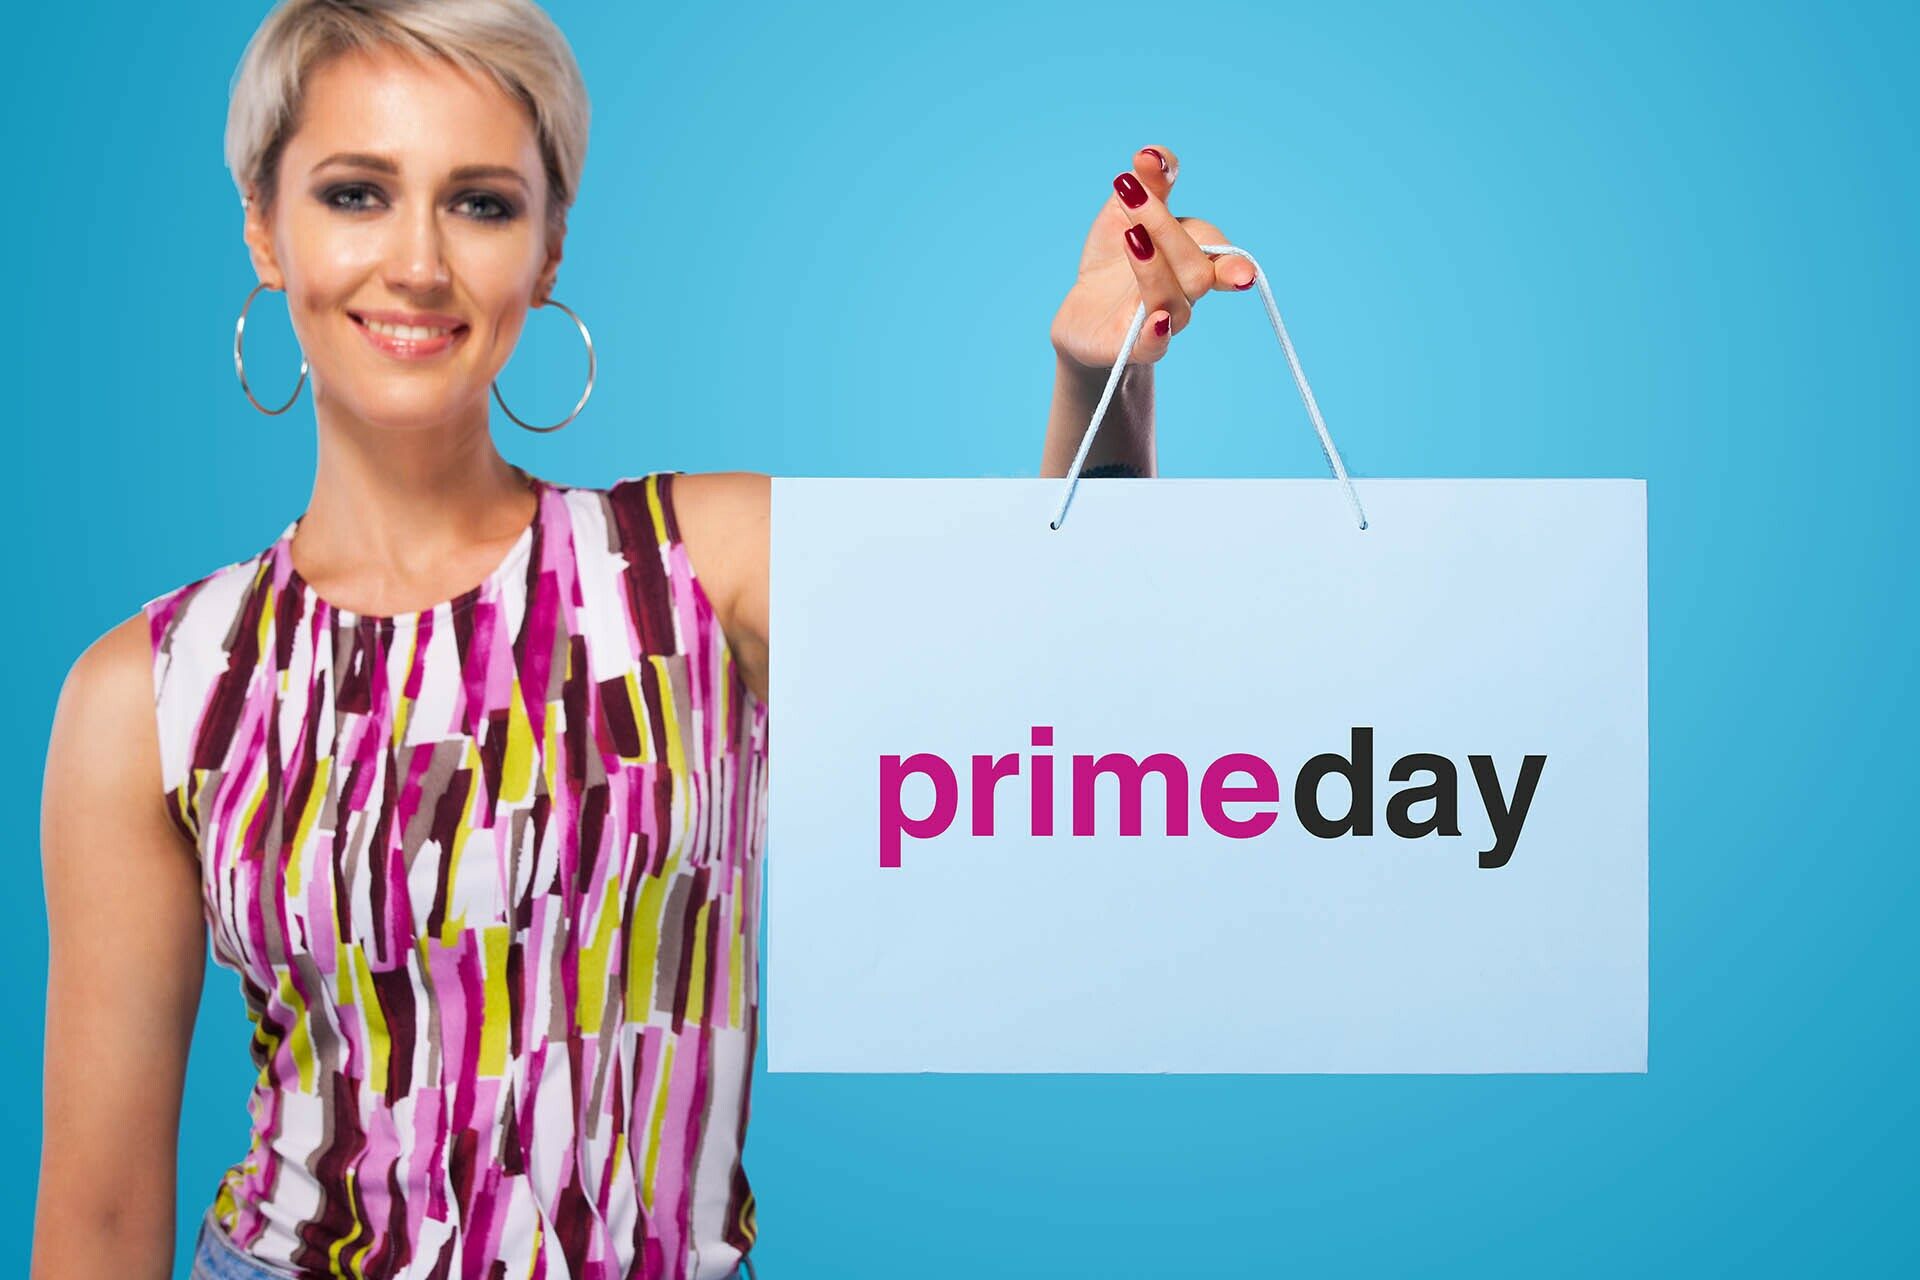 Prime Day 2020: Home categories fuel retail rivalry & desirable discounts